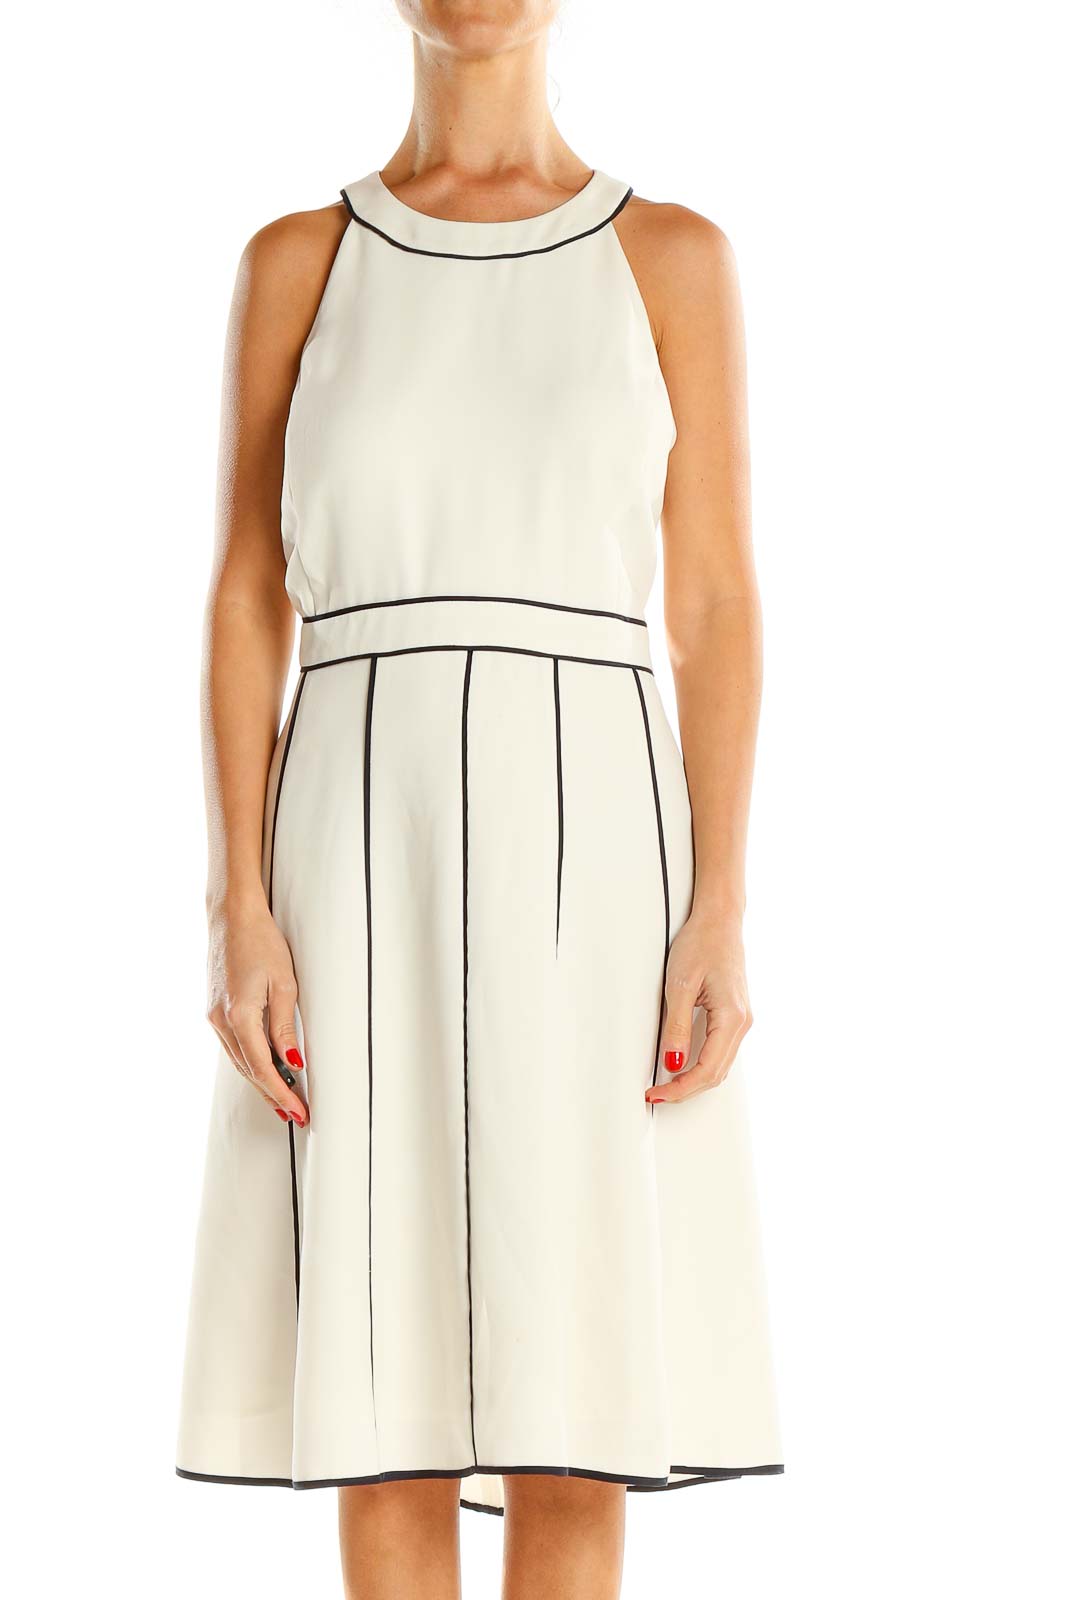 White Shift Dress With Black Lining Front